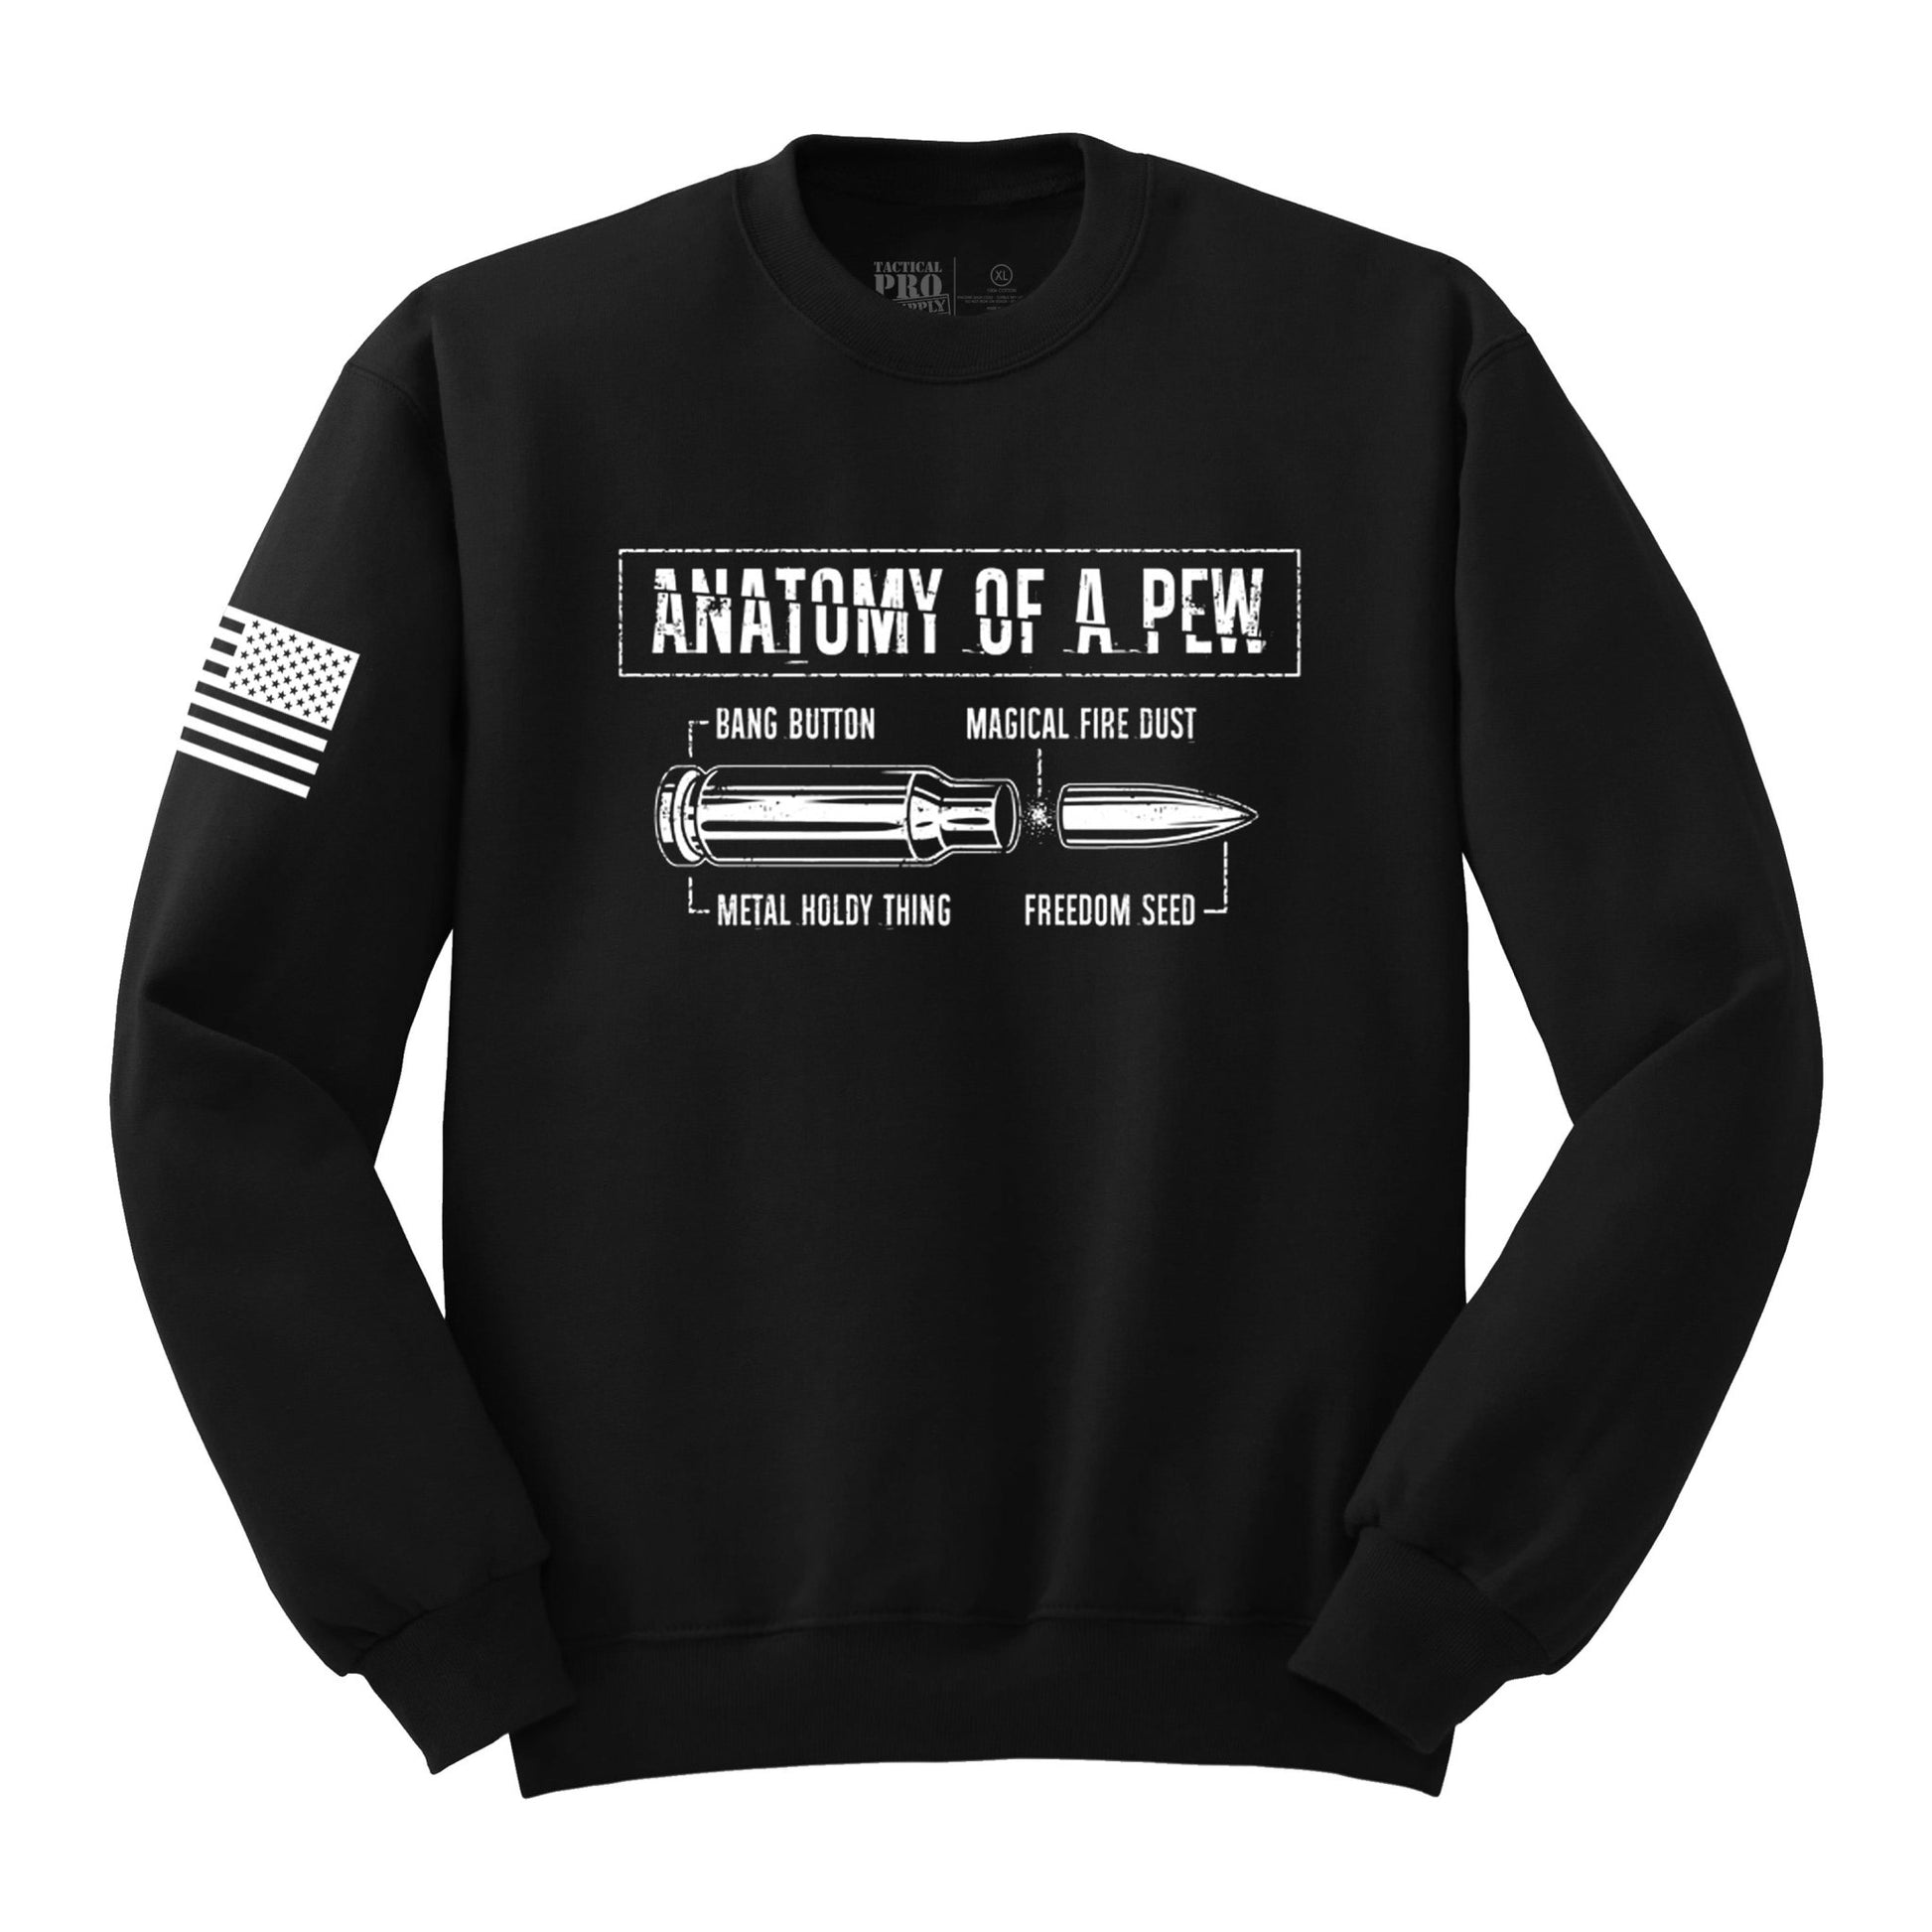 Anatomy of a Pew - Tactical Pro Supply, LLC